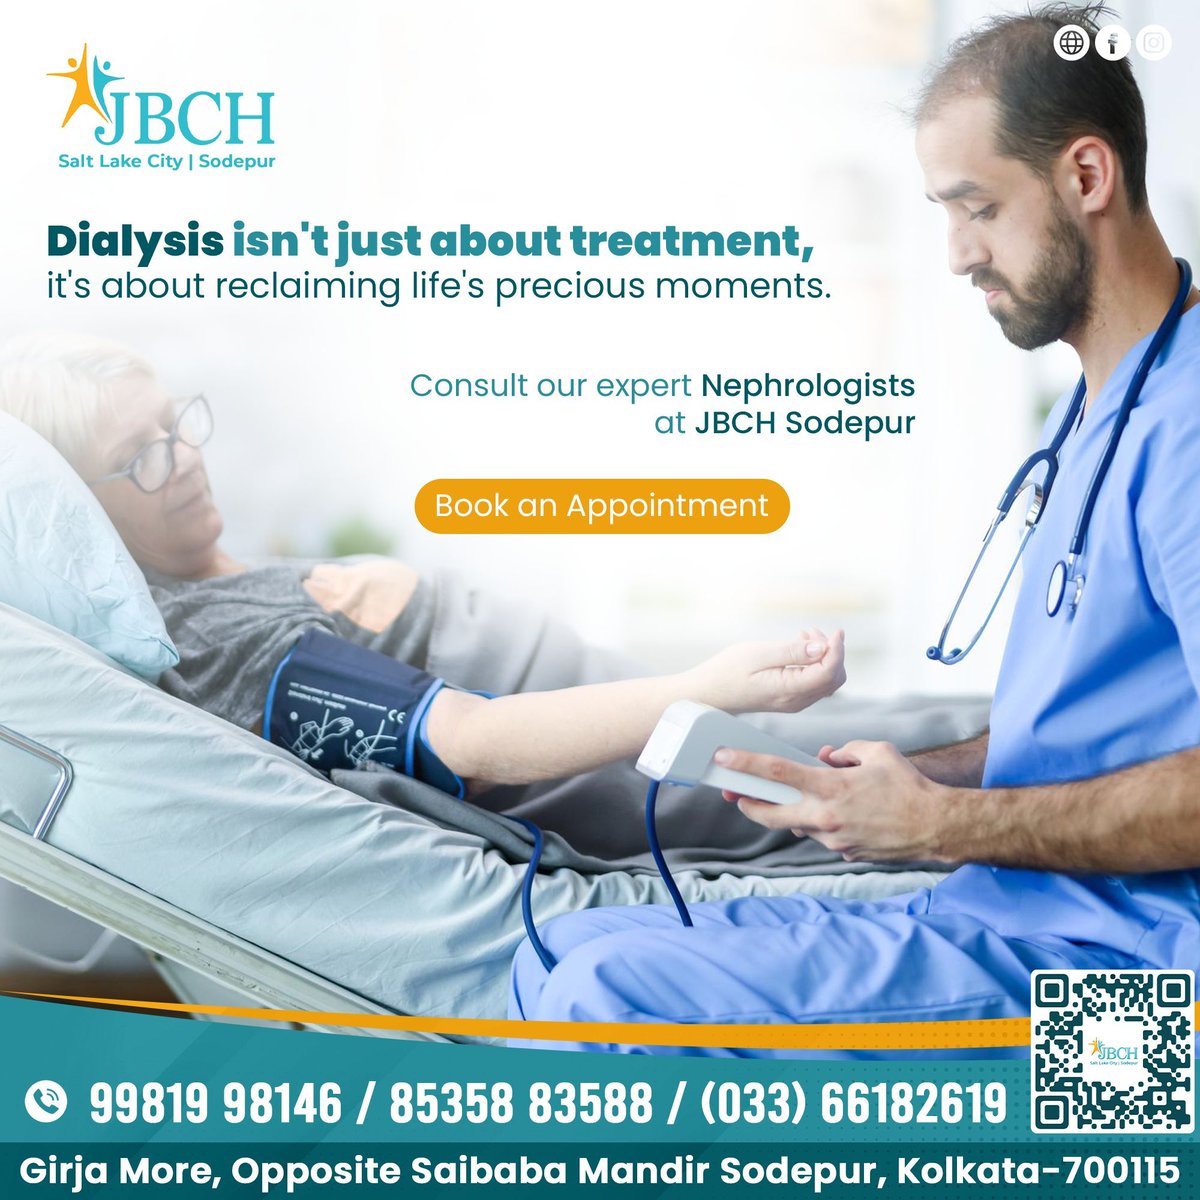 Reclaim life's precious moments with expert care. Consult our nephrologists at JBCH Sodepur.

Book Your Appointment 📝 Visit here for more information: buff.ly/3m6ARI6
.
.
#JBCHSodepur #DialysisCare #NephrologyExperts #HealthyKidneys #DialysisSupport #KidneyCare